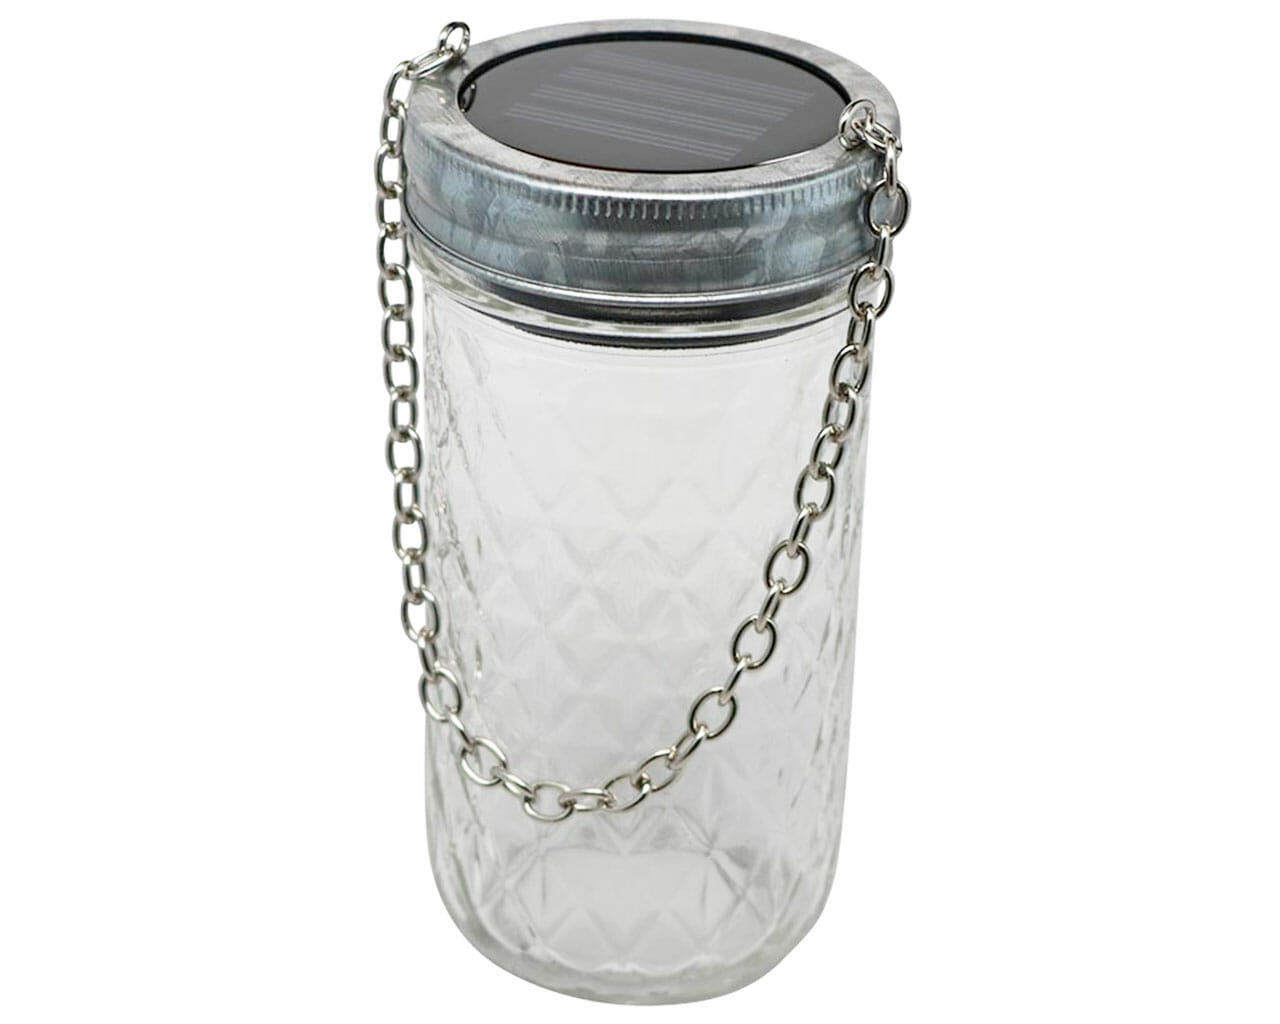 Galvanized Metal Band with Chain for Wide Mouth Mason Jars